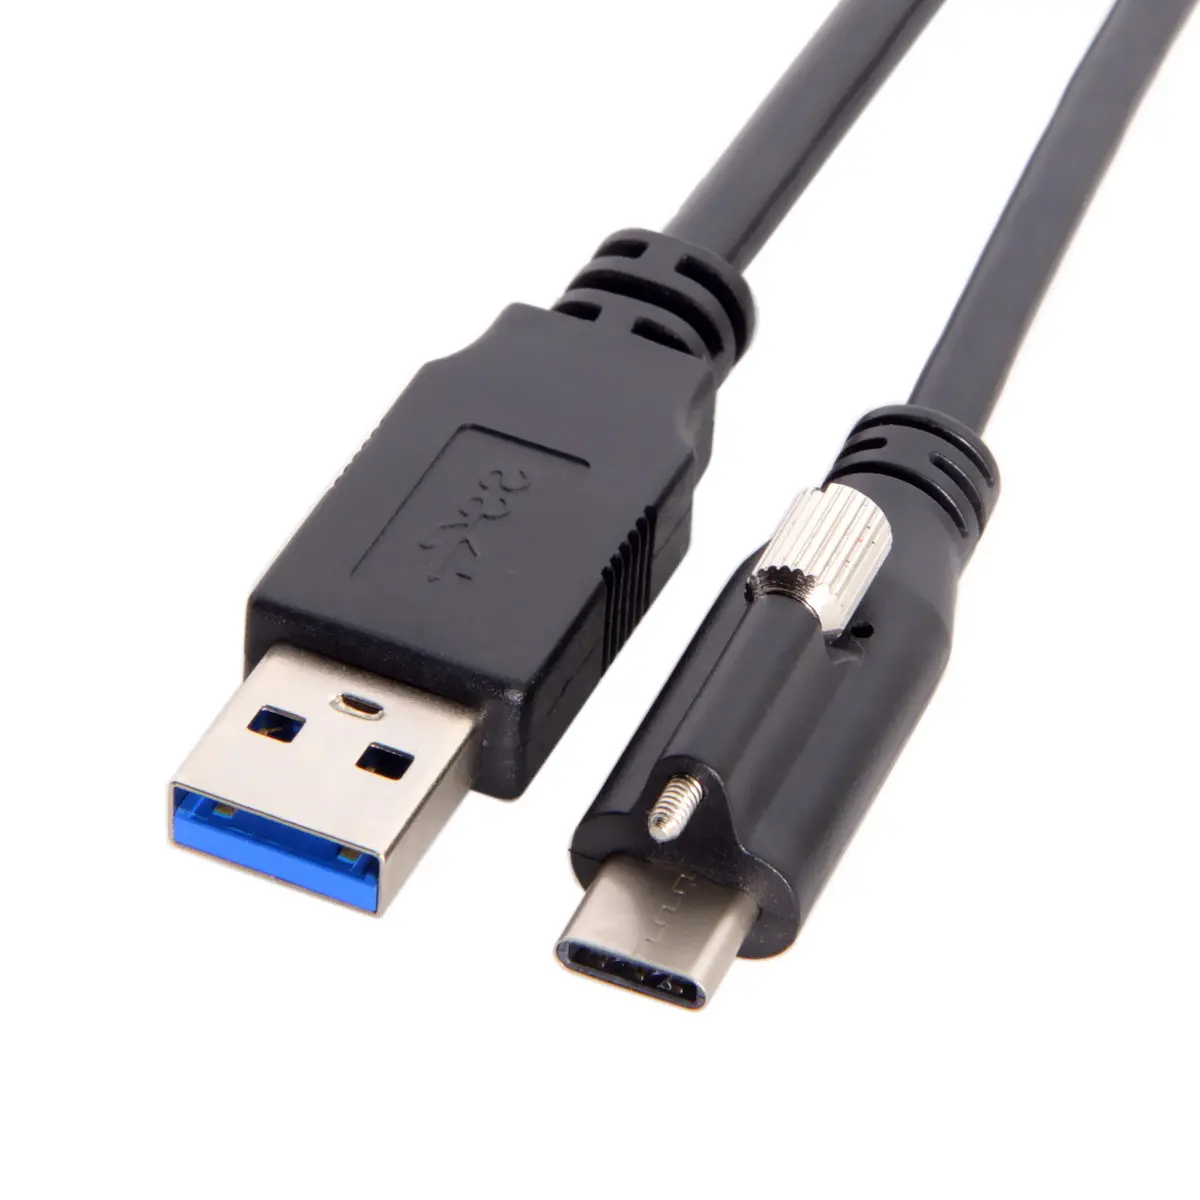 

CY USB 3.1 Type-C Locking Connector to Standard USB3.0 Data Cable 1.2m With Panel Mount Screw